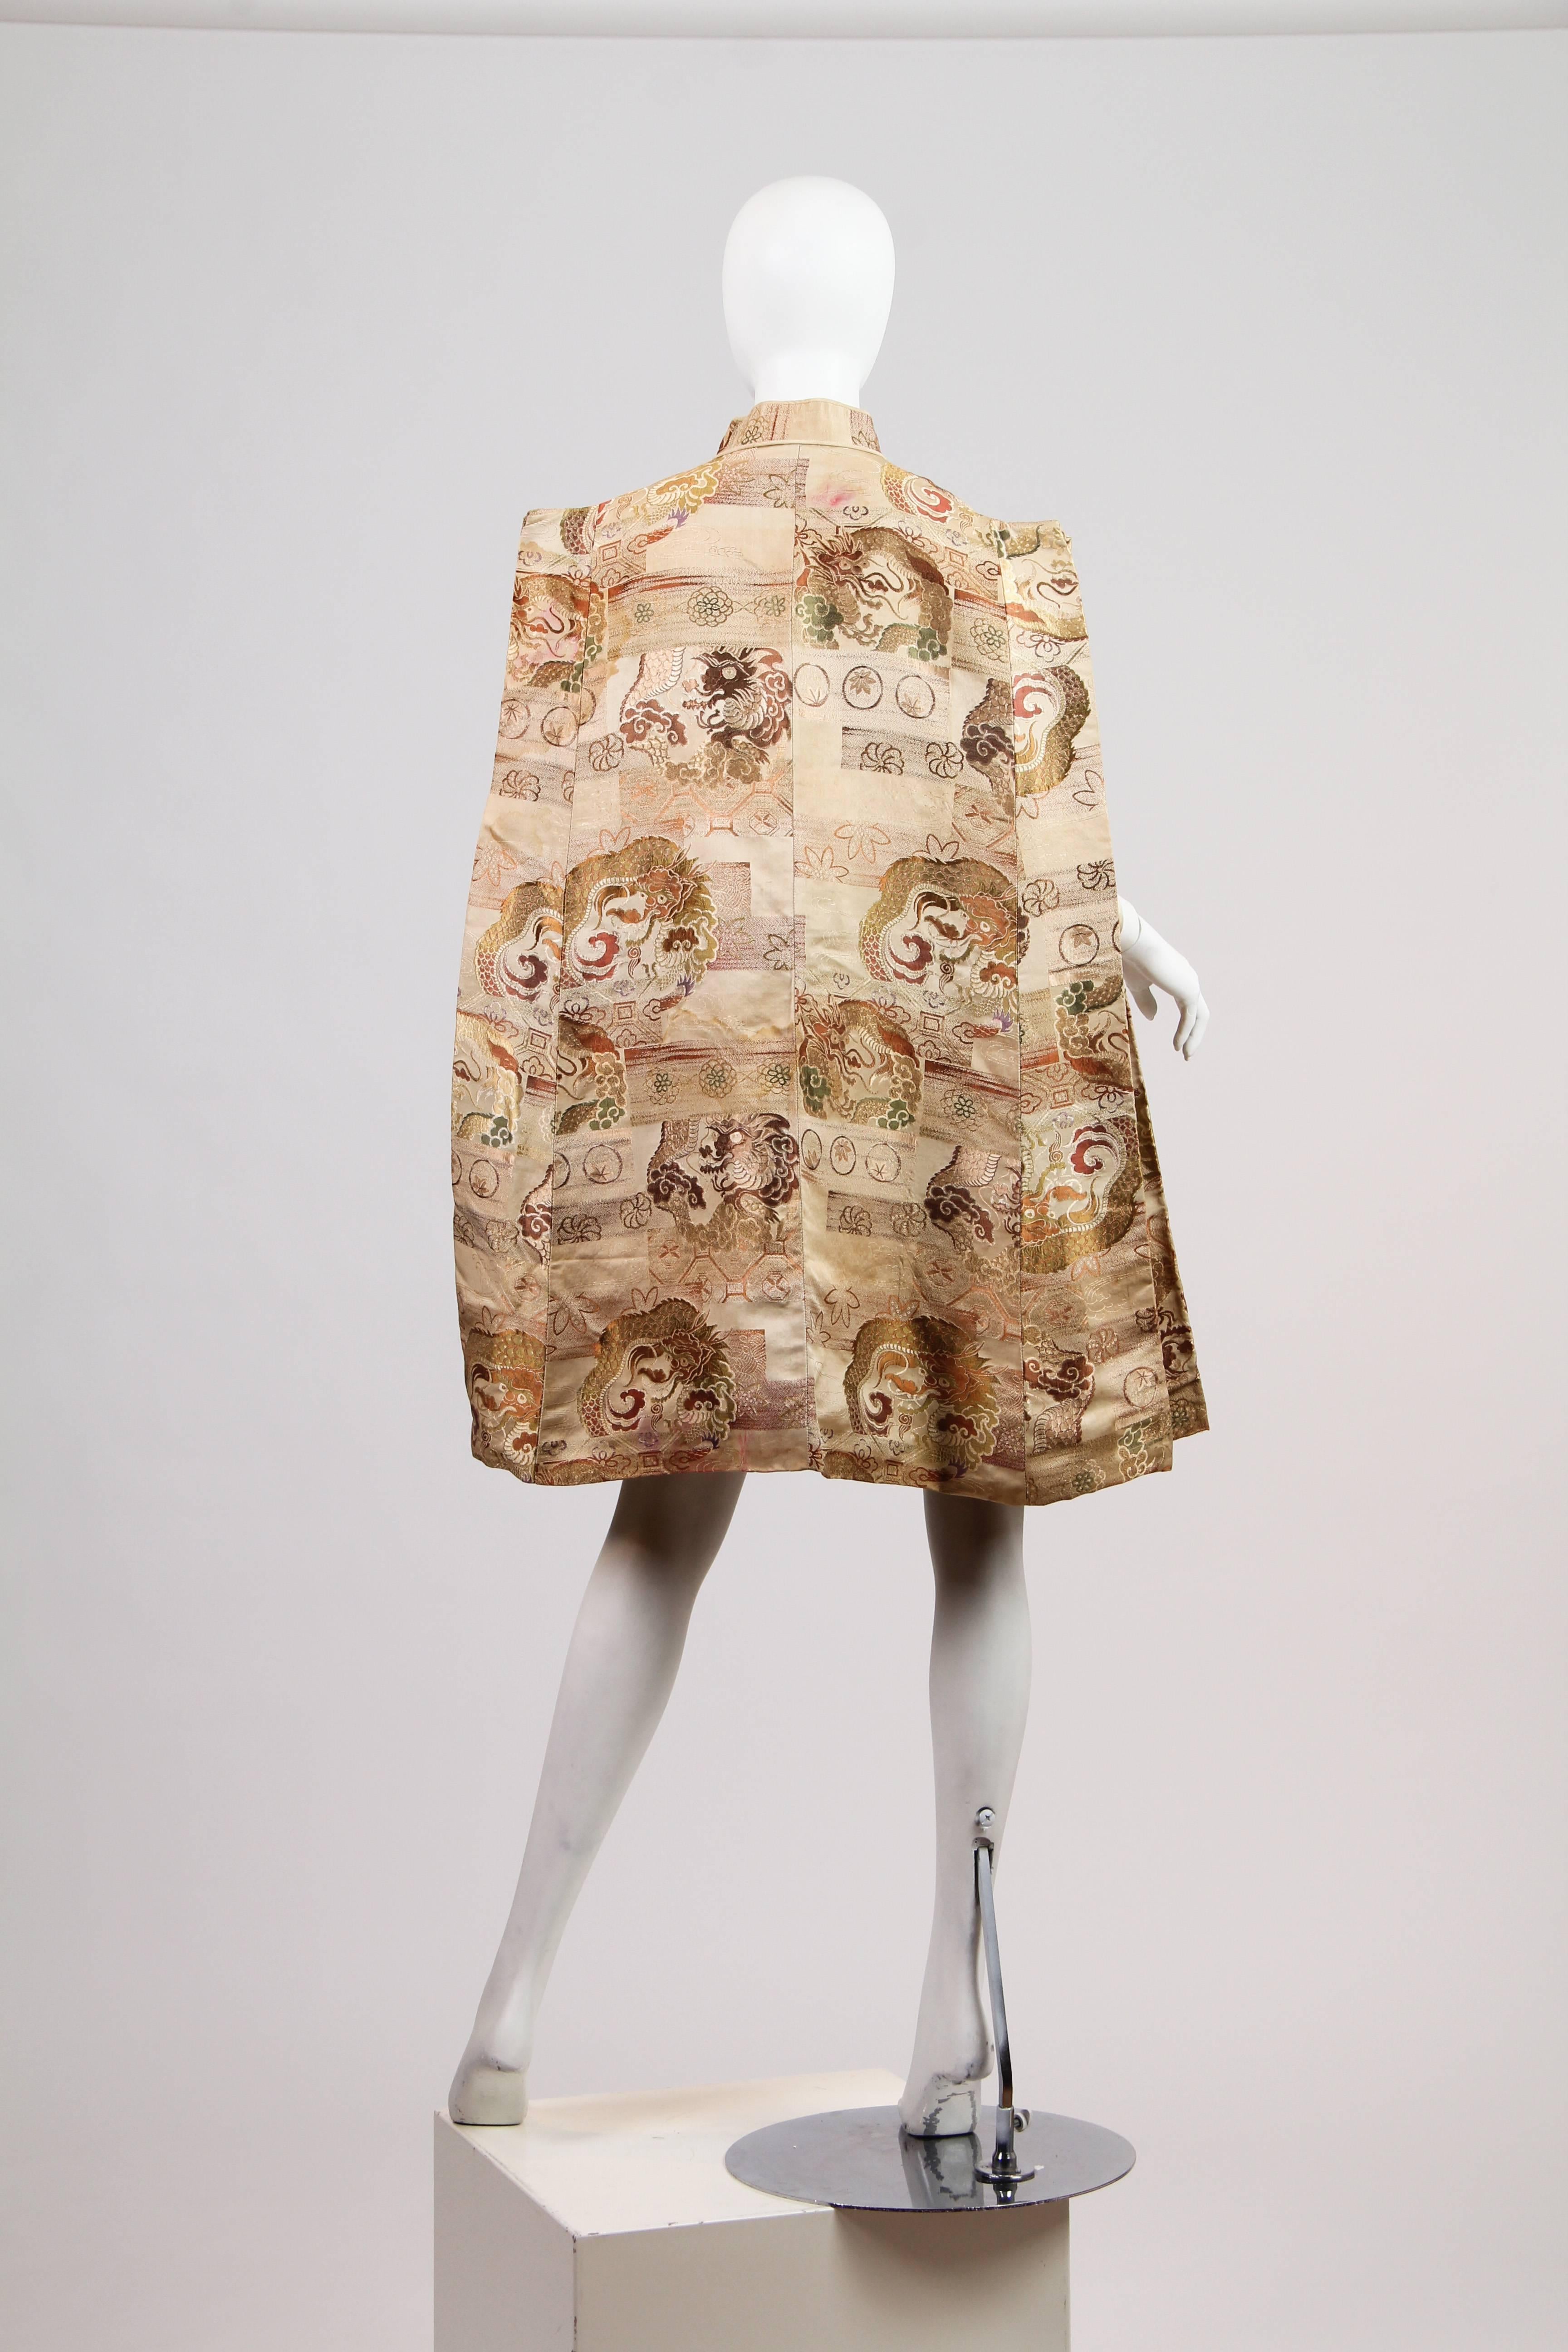 Women's 1940s Cape made from Antique Japanese Fabric with Dragons